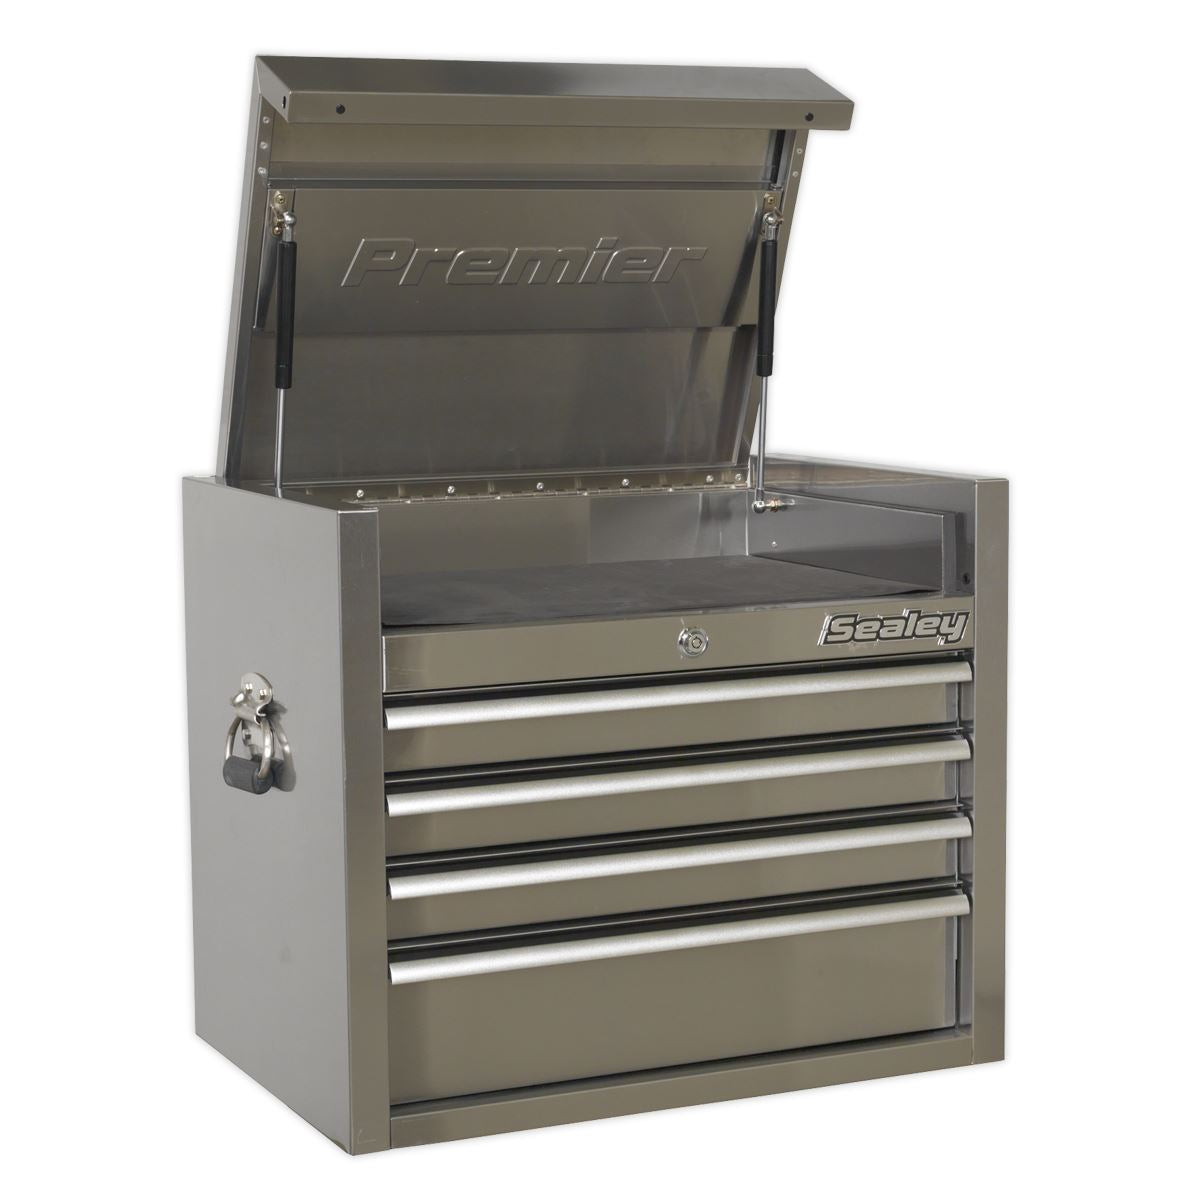 Sealey Premier Topchest 4 Drawer 675mm Stainless Steel Heavy-Duty